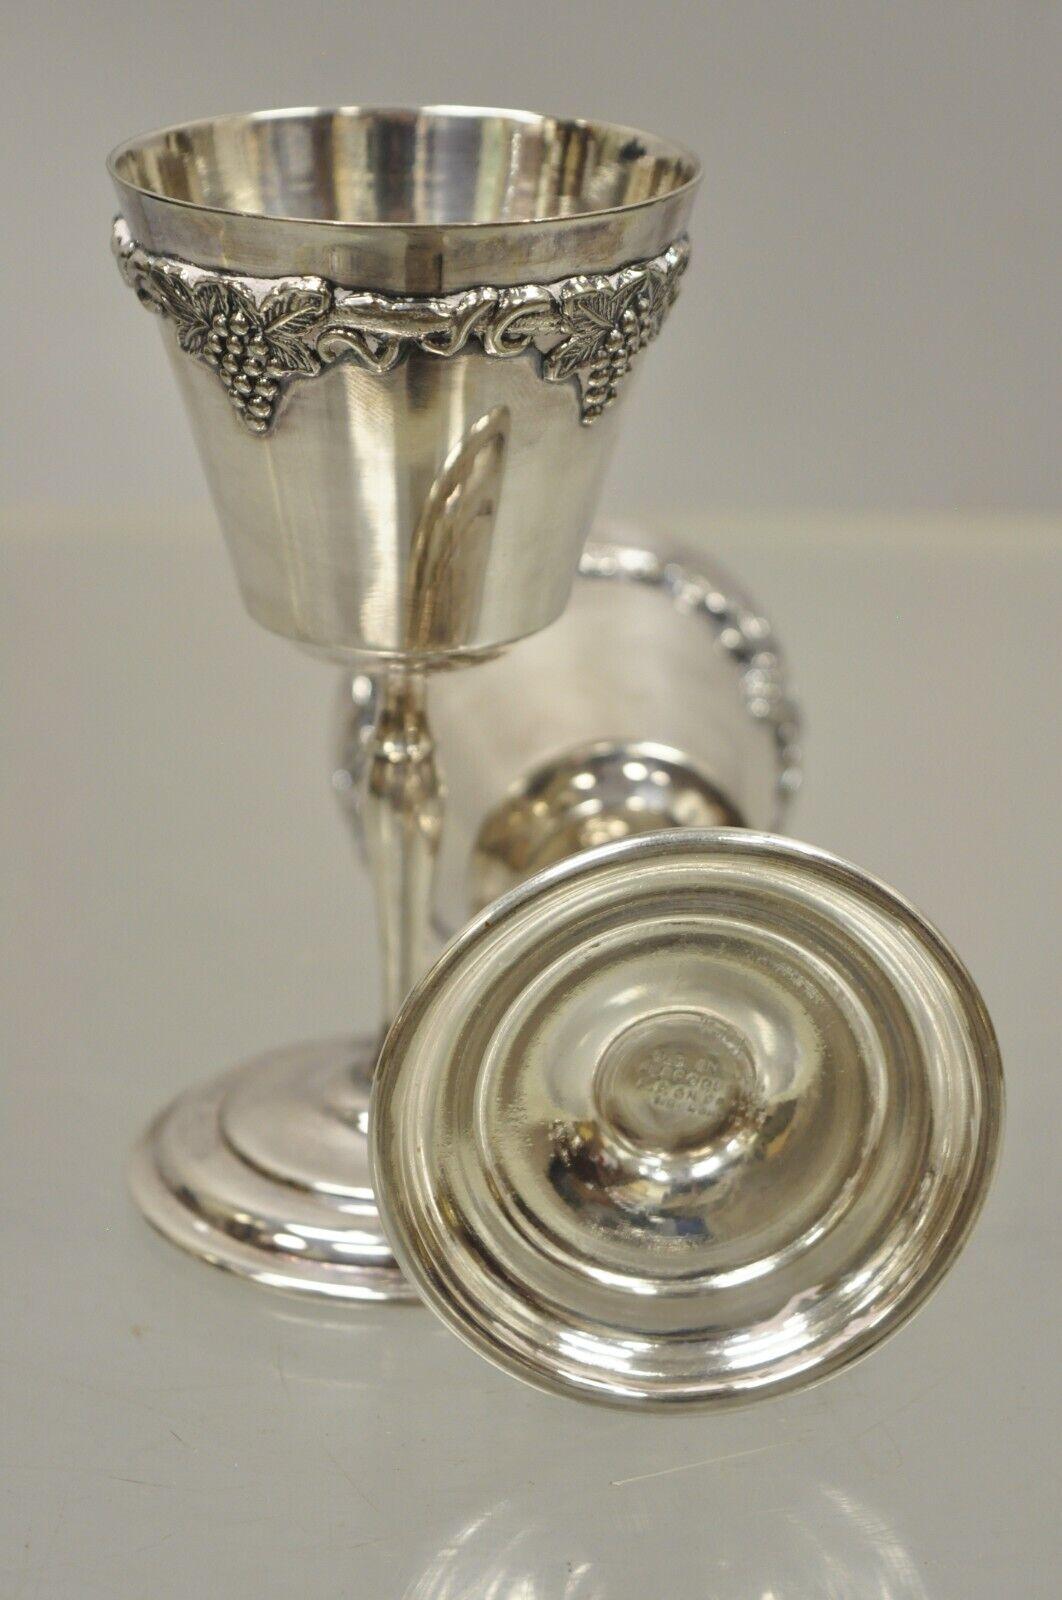 20th Century Antique Old English Repro Silver Plated Sherry Wine Liquor Goblet Cups Set of 2